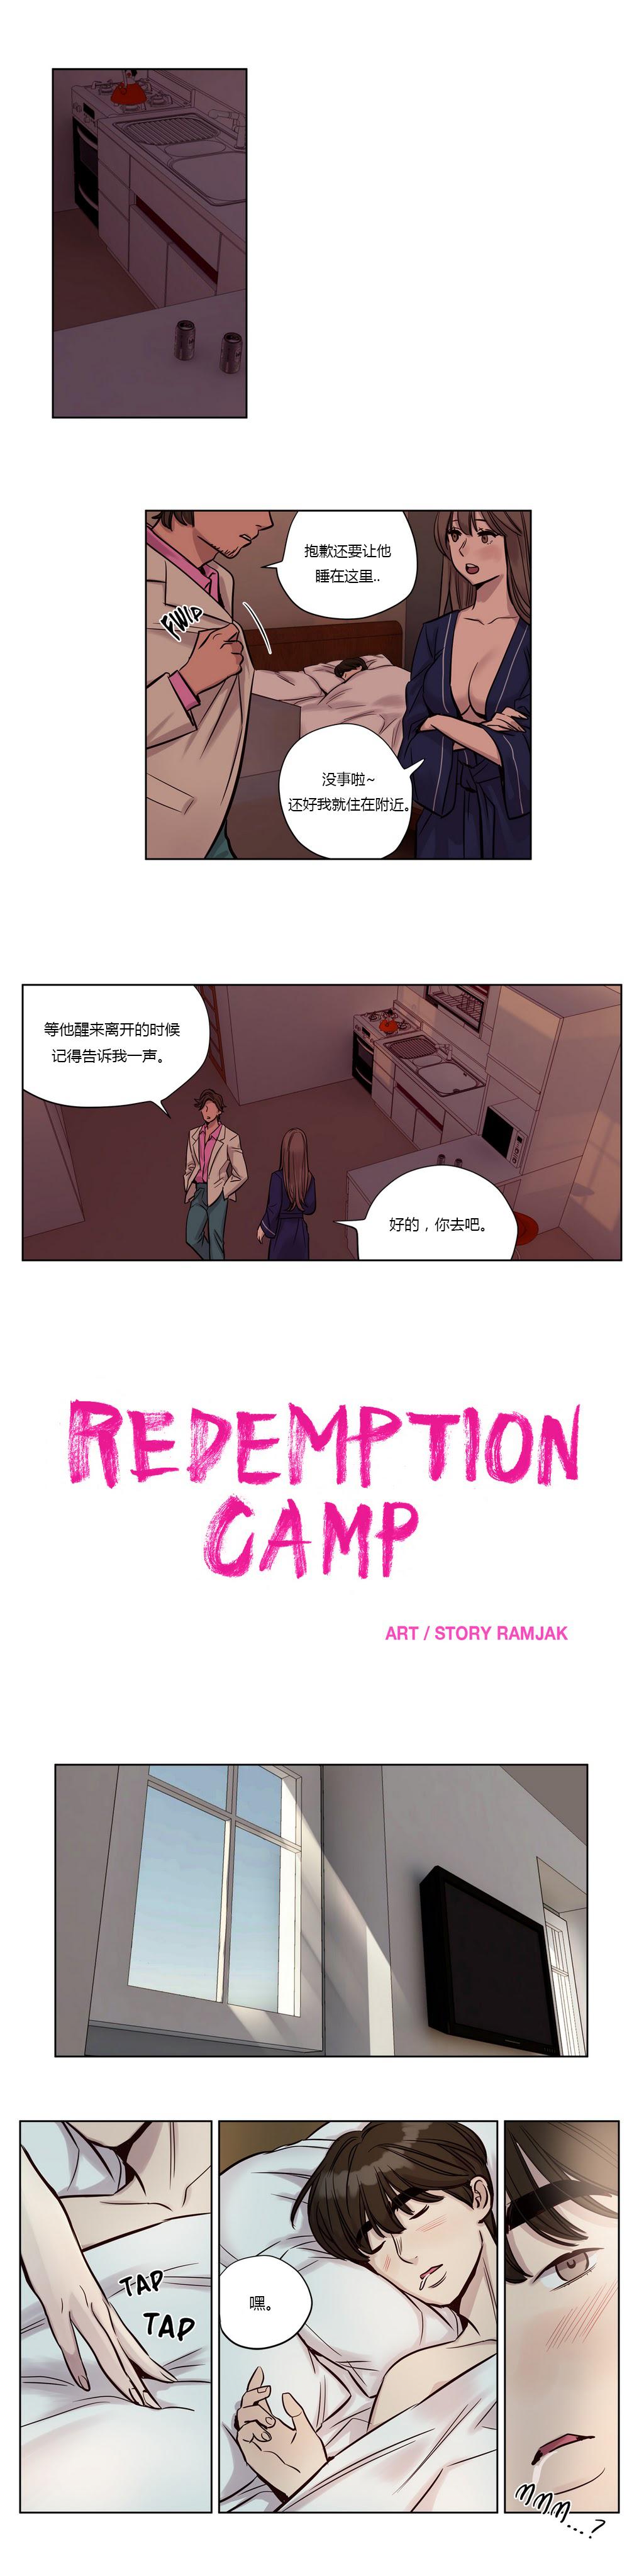 Atonement Camp Ch.21-23 7